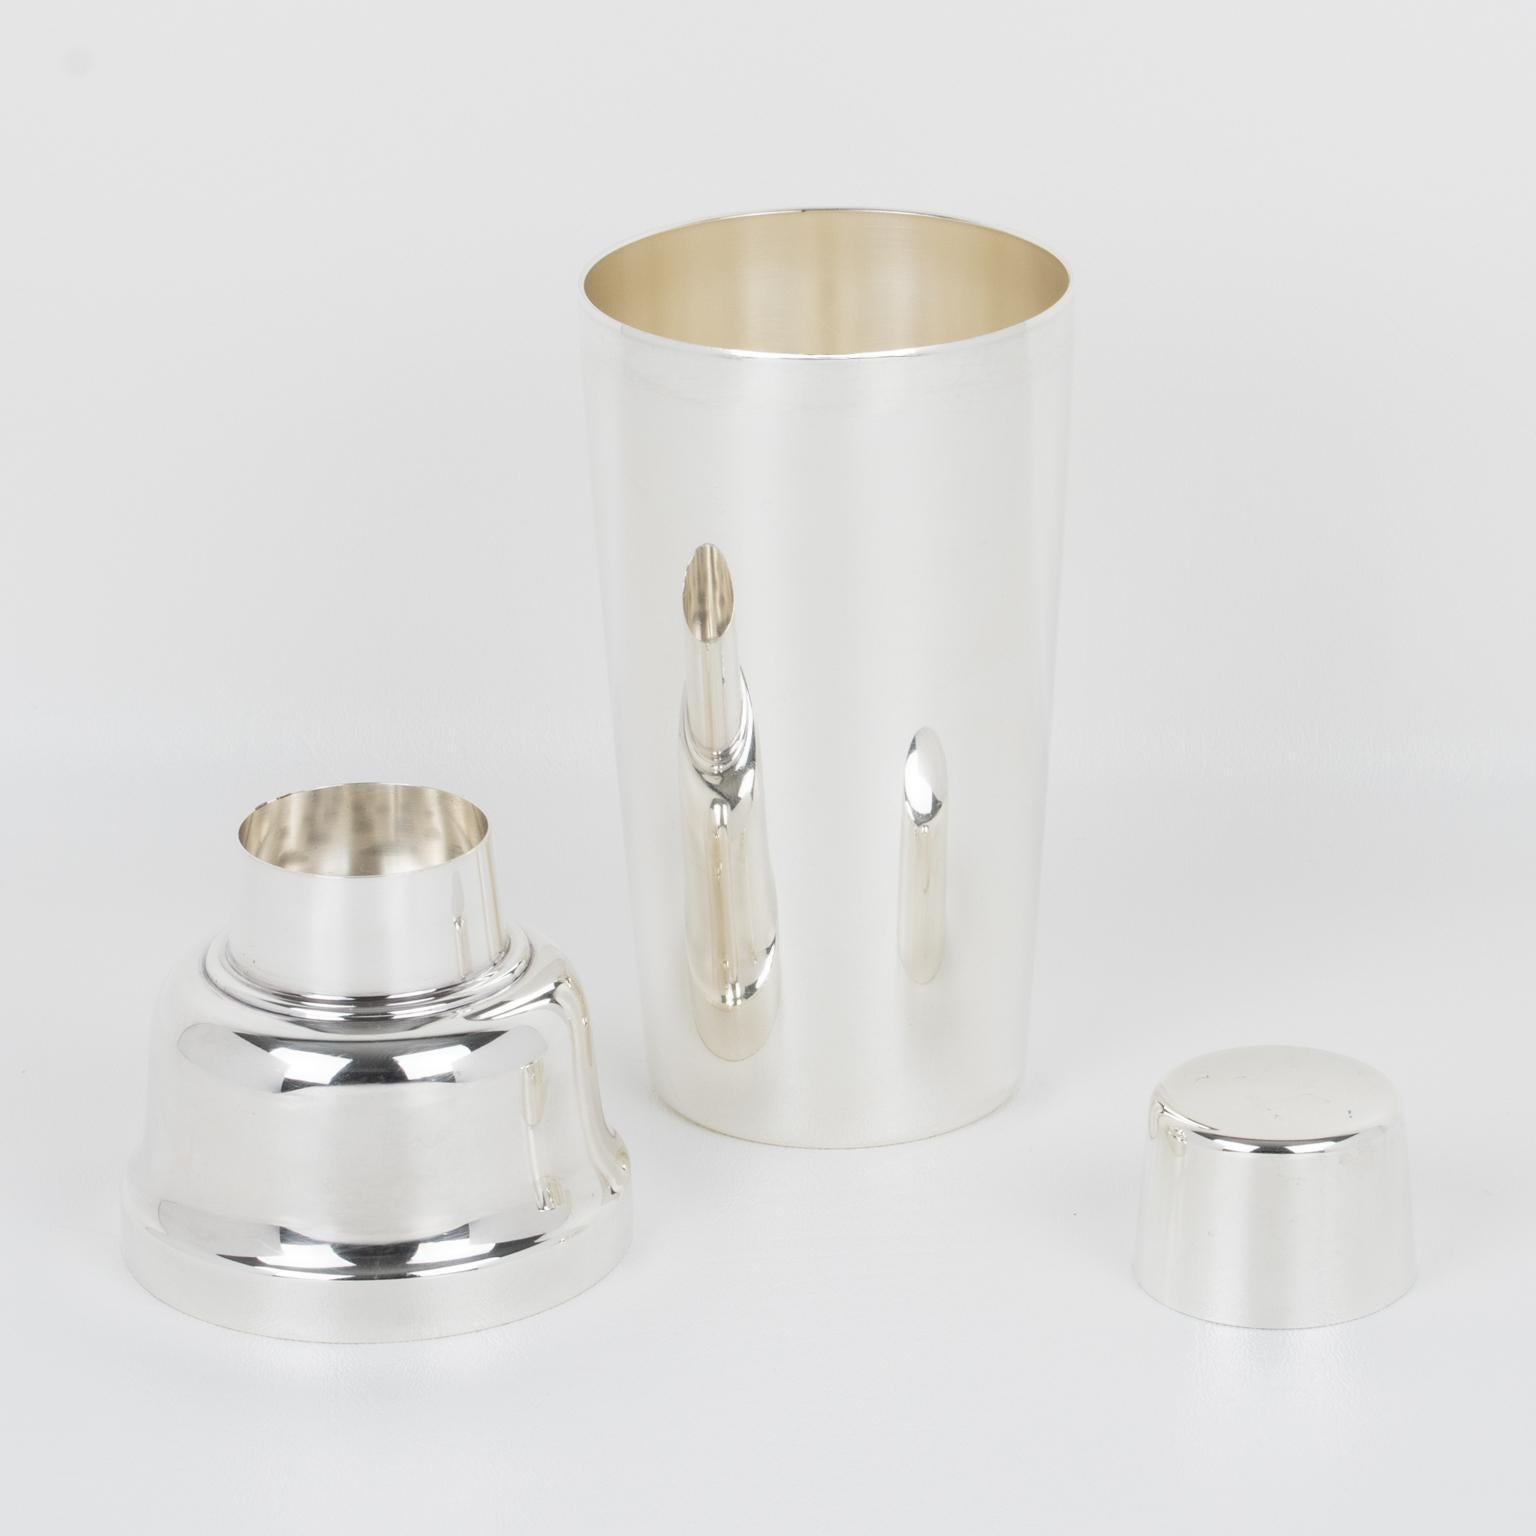 This fabulous Art Deco silver plate cylindrical cocktail or Martini shaker was crafted by silversmith WMF, Germany, in the 1920s. The three-sectioned cocktail shaker has a removable cap and strainer. The lovely geometric shape boasts a typical